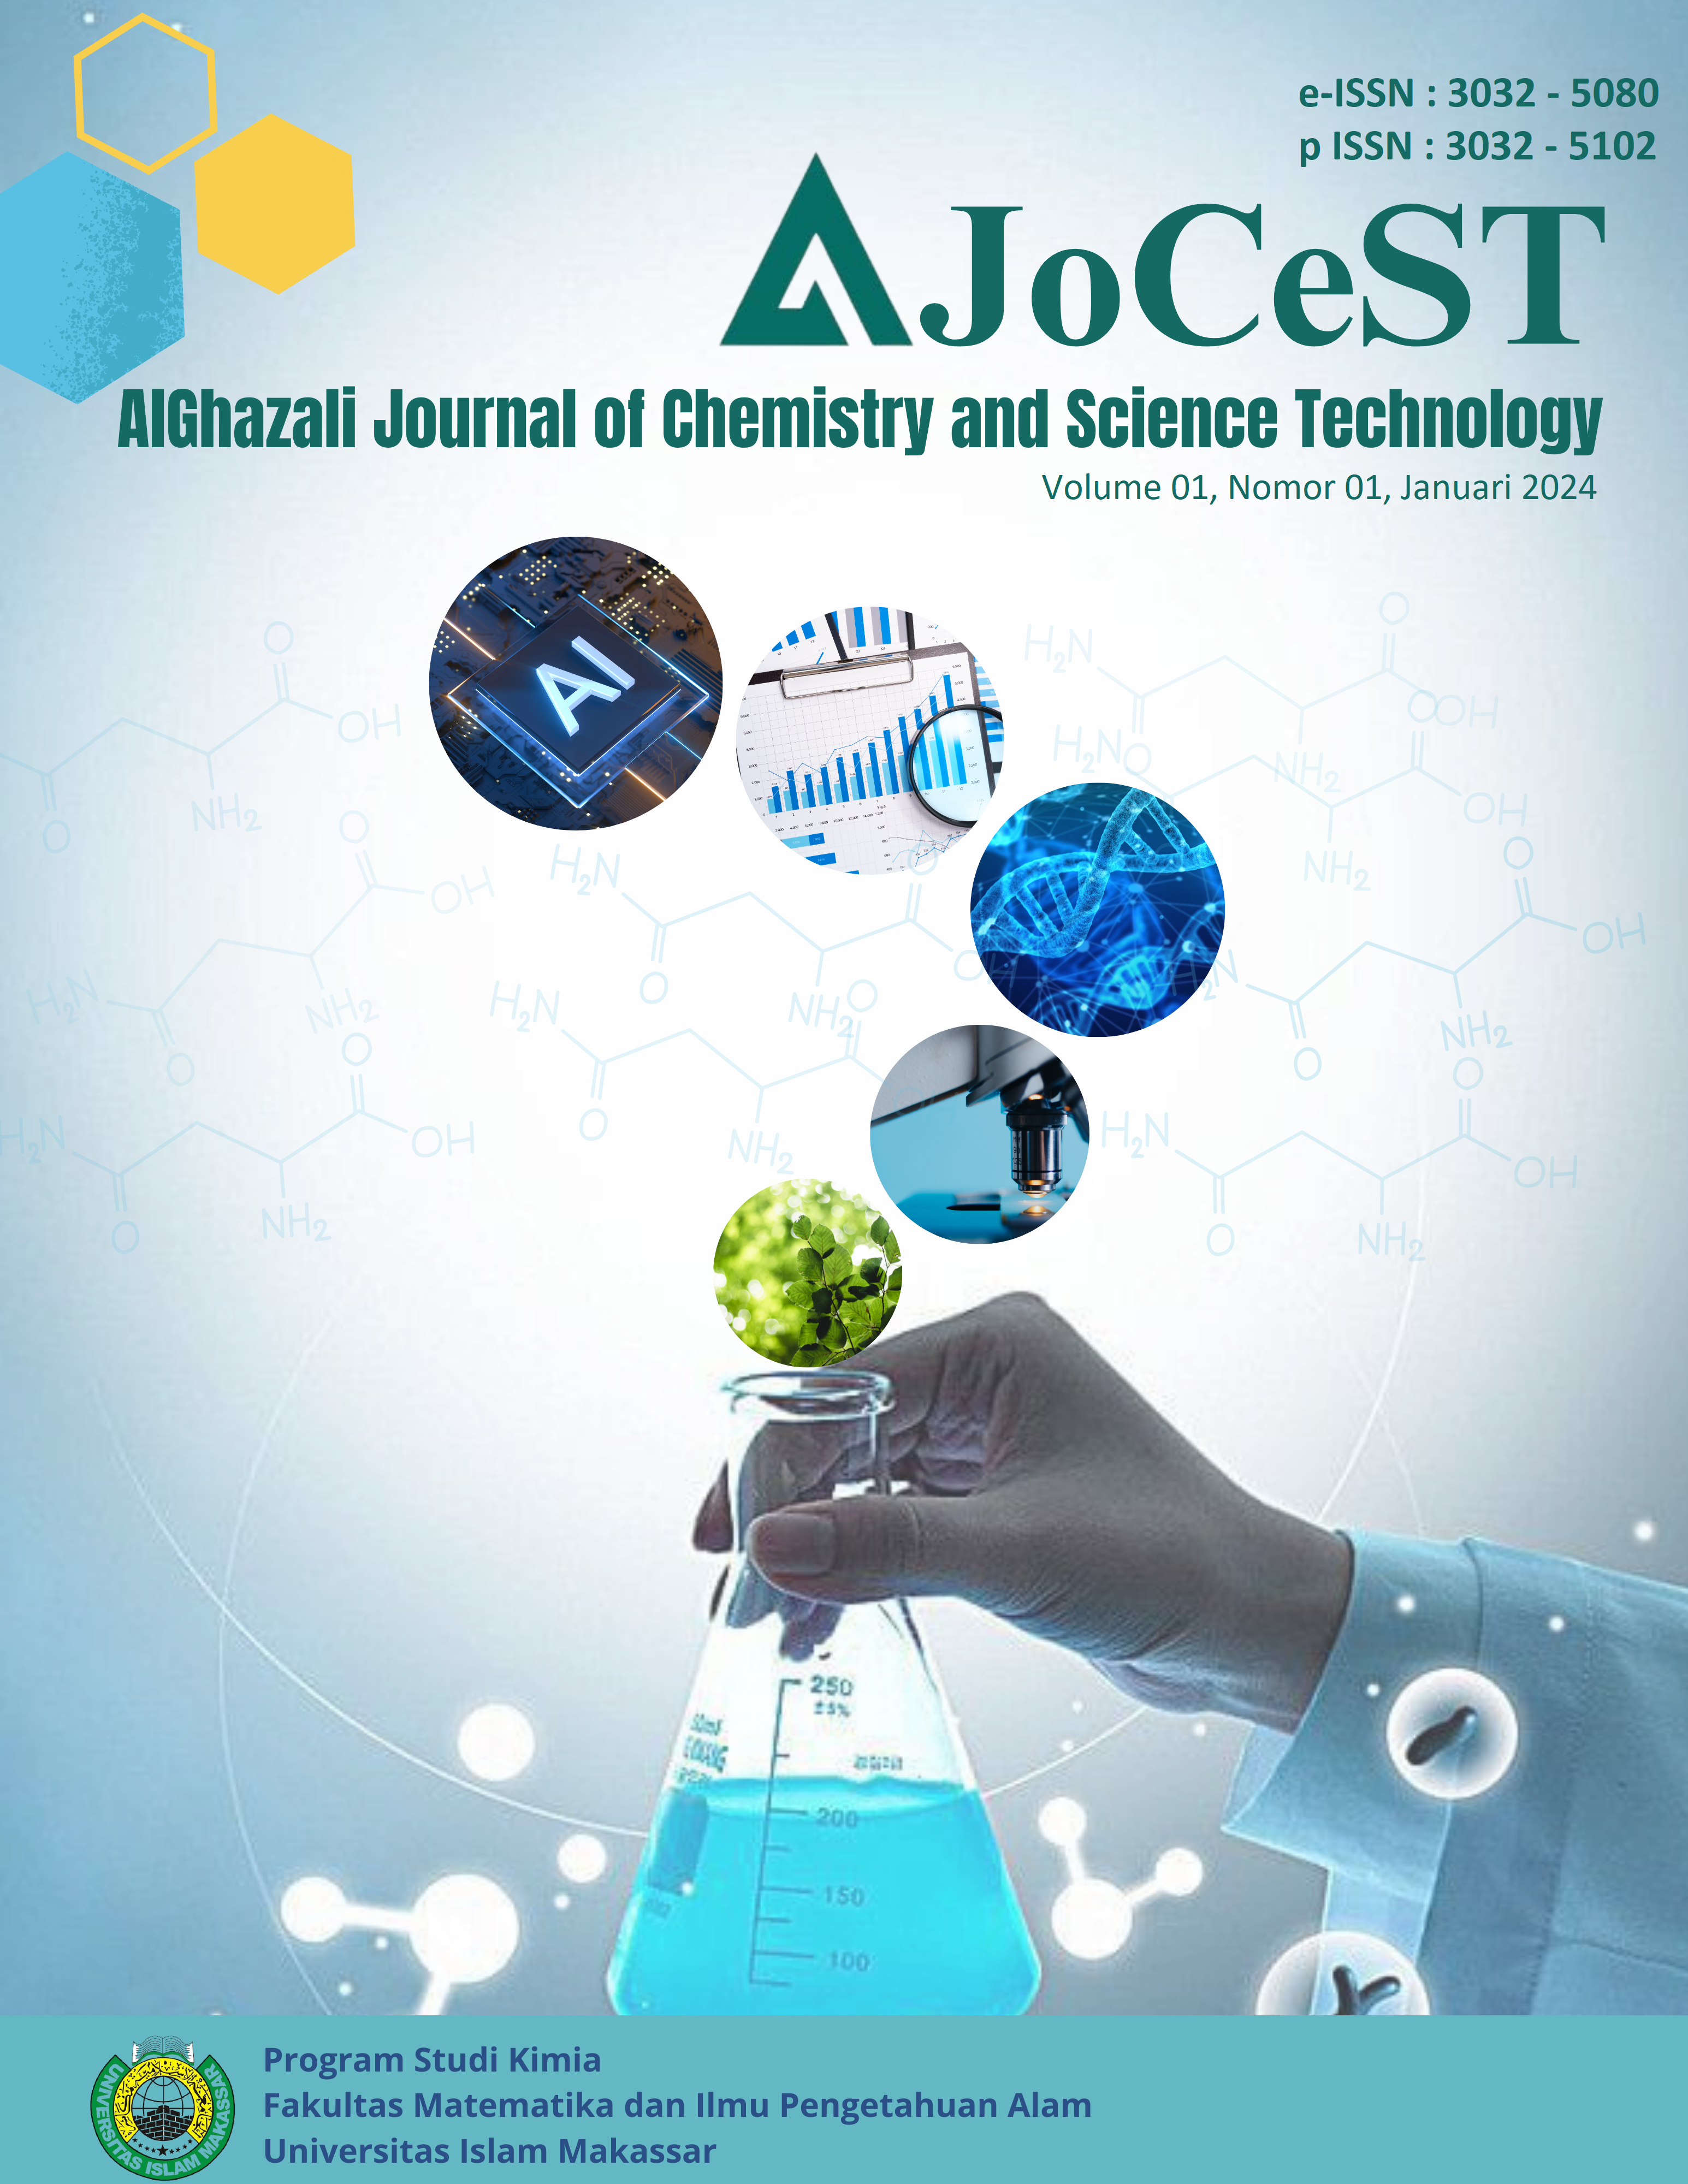 					View Vol. 1 No. 01 (2024): Alghazali Journal of Chemistry and Science Technology (AJoCeST)
				